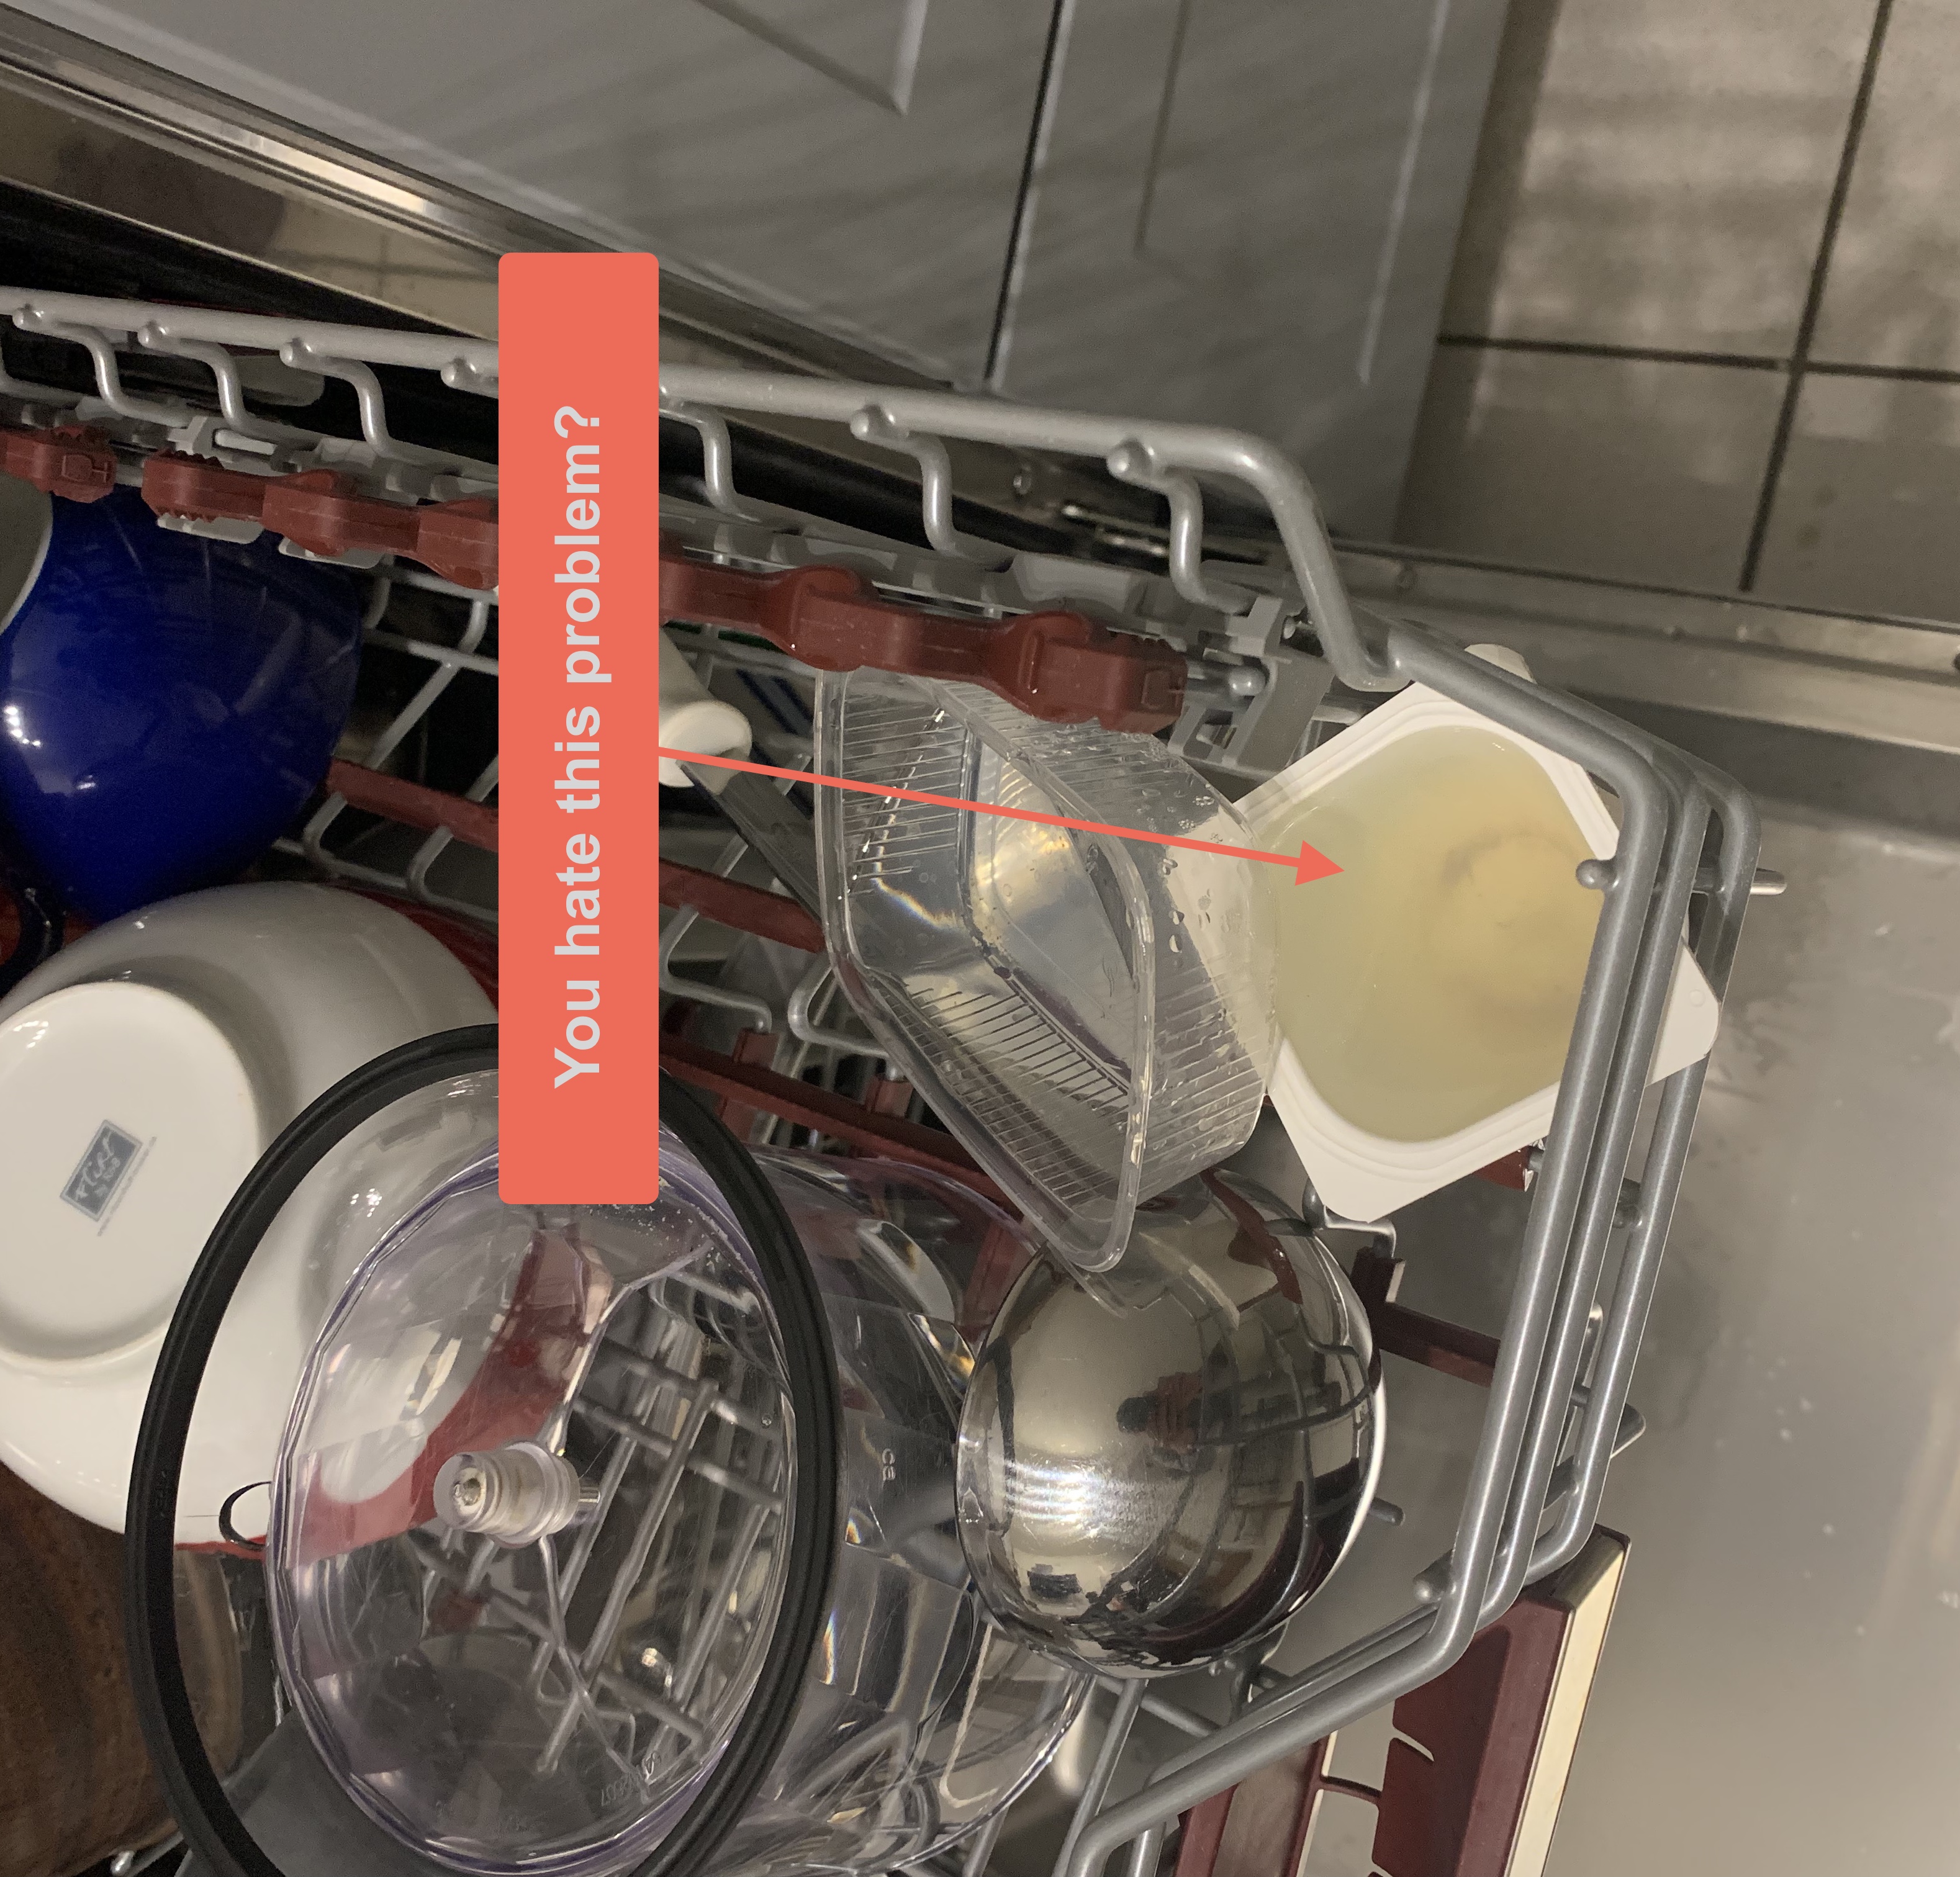 Small Parts Holder for Dishwasher